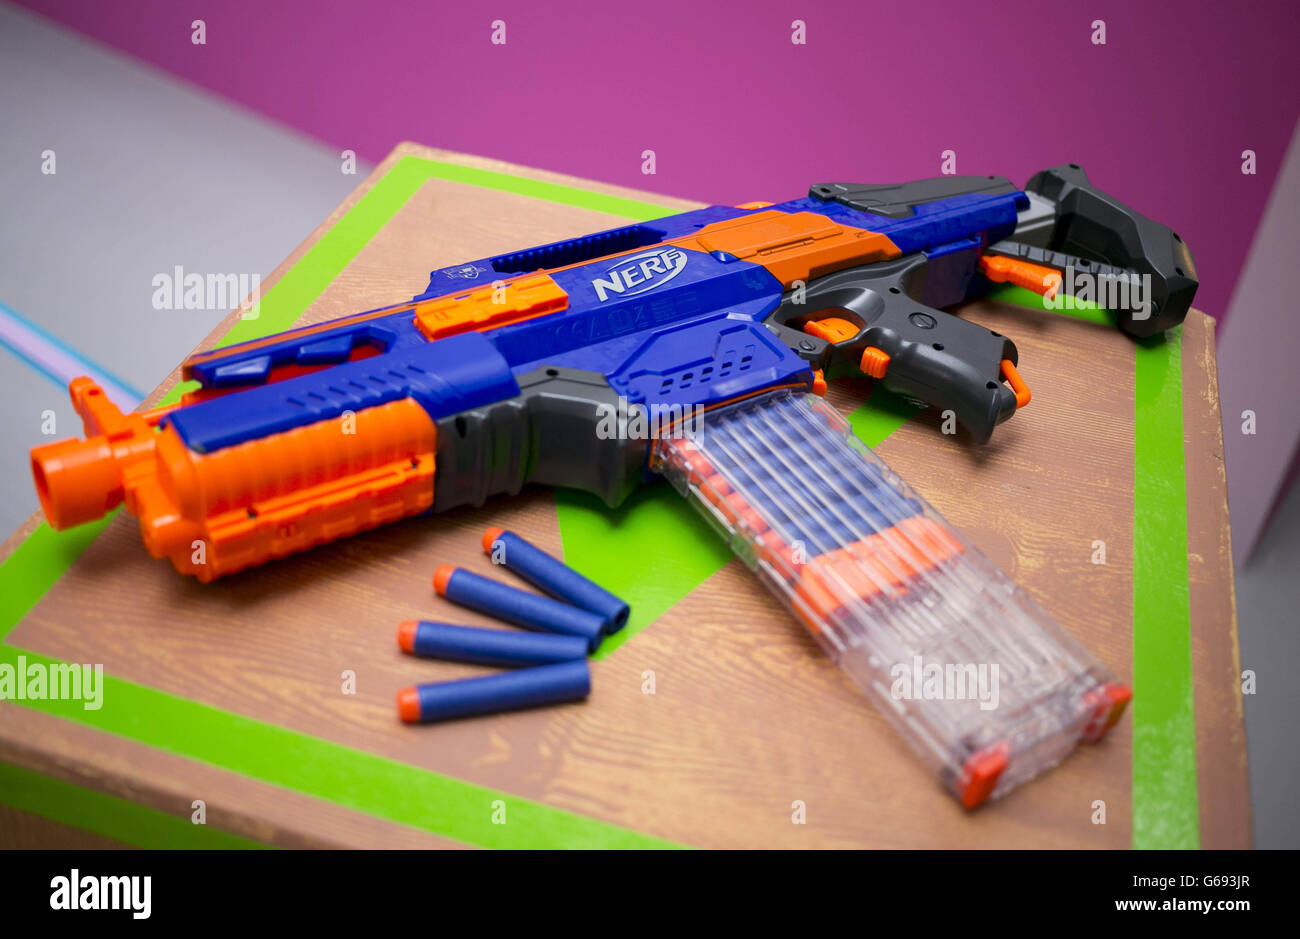 The Nerf N Strike Elite RapidStrike on display at the Argos Christmas  Preview in London Stock Photo - Alamy